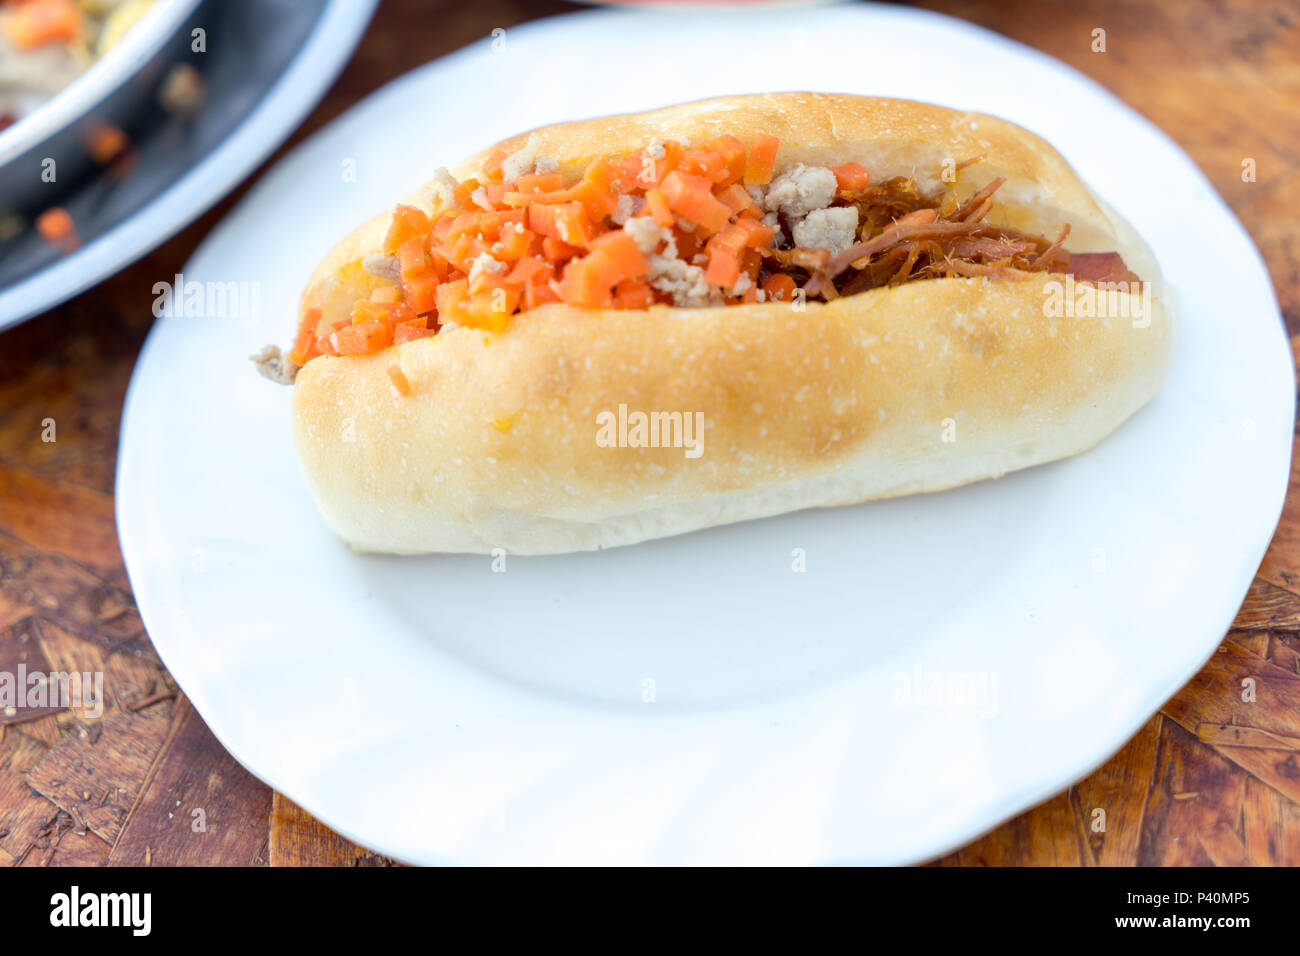 Northeastern Thai breakfast with French bread stuff with minced pork and sausage, also common for Vietnamese and Laos people Stock Photo